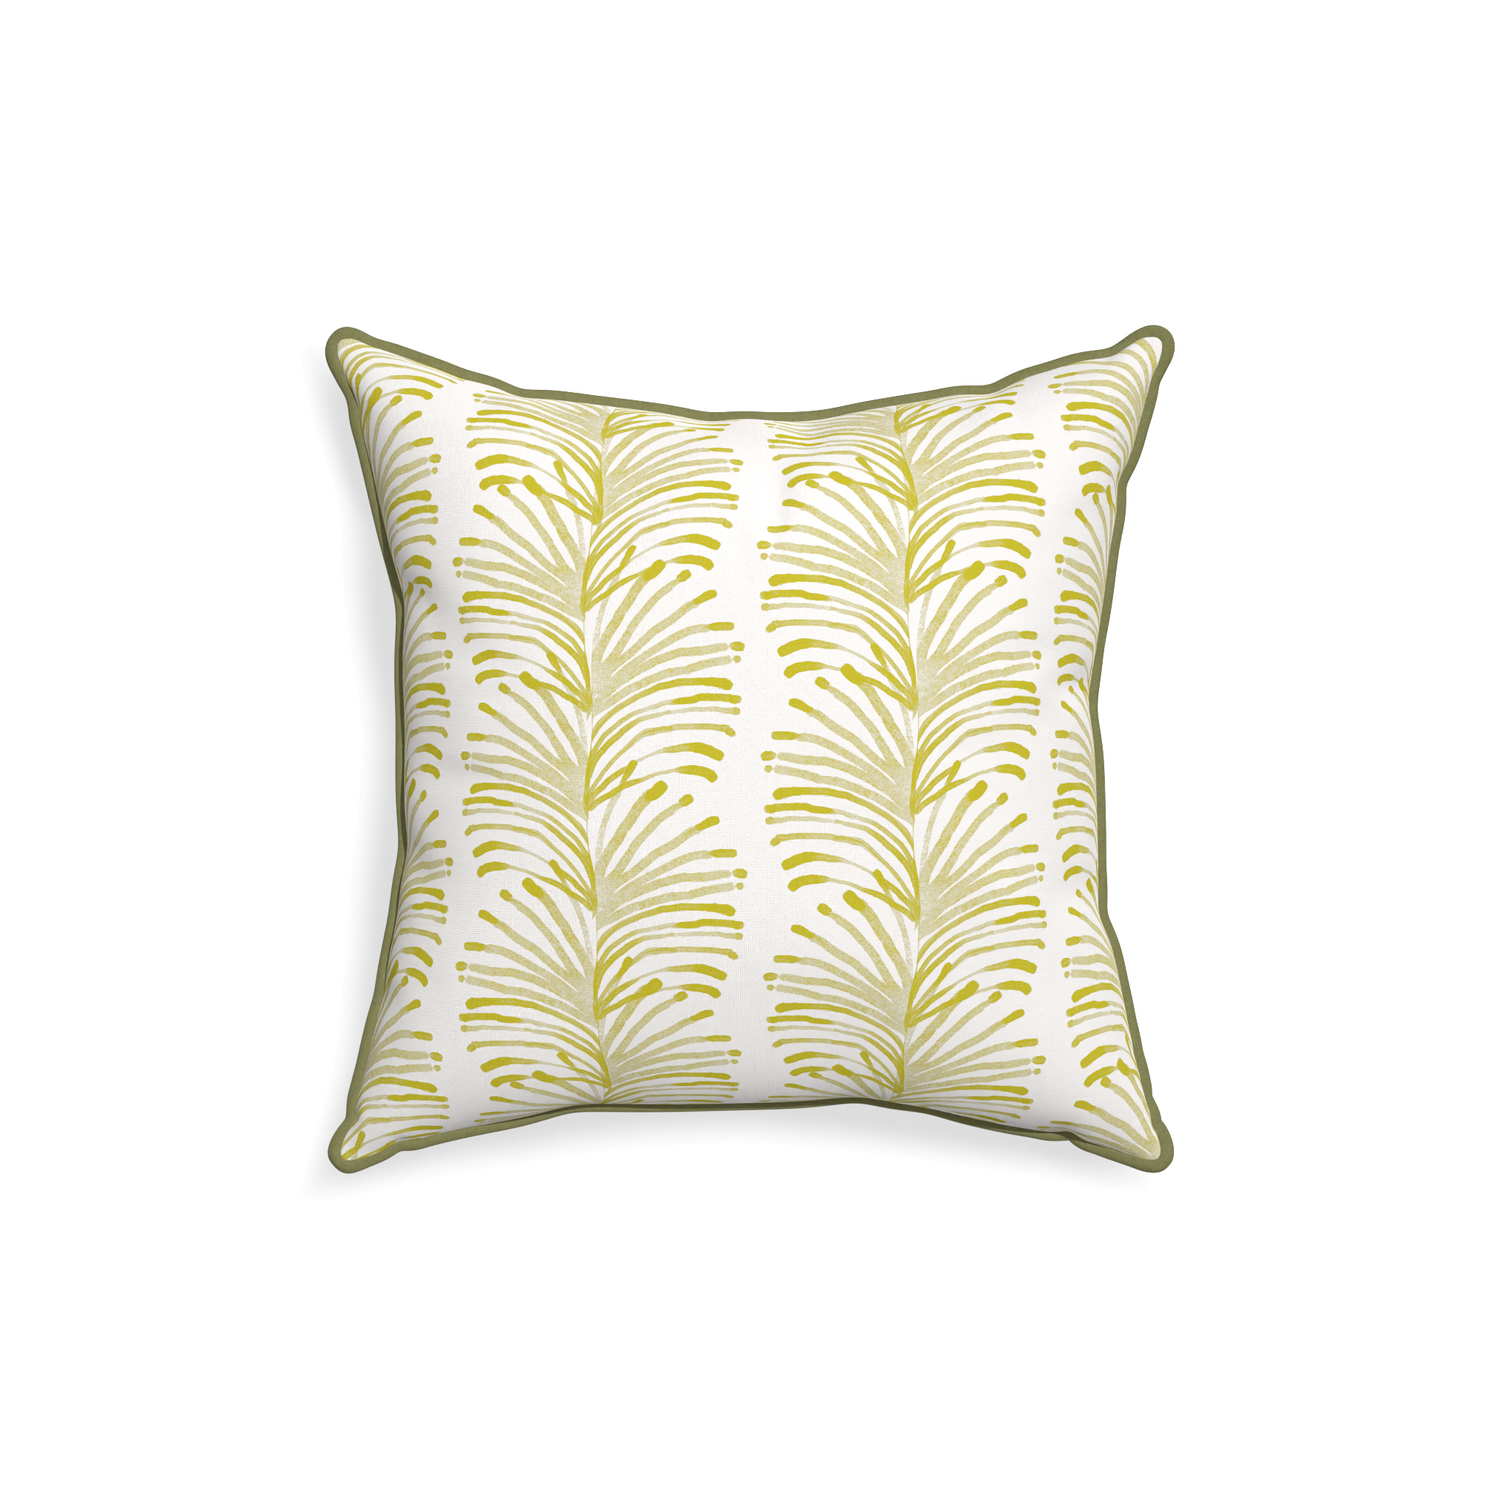 18-square emma chartreuse custom pillow with moss piping on white background